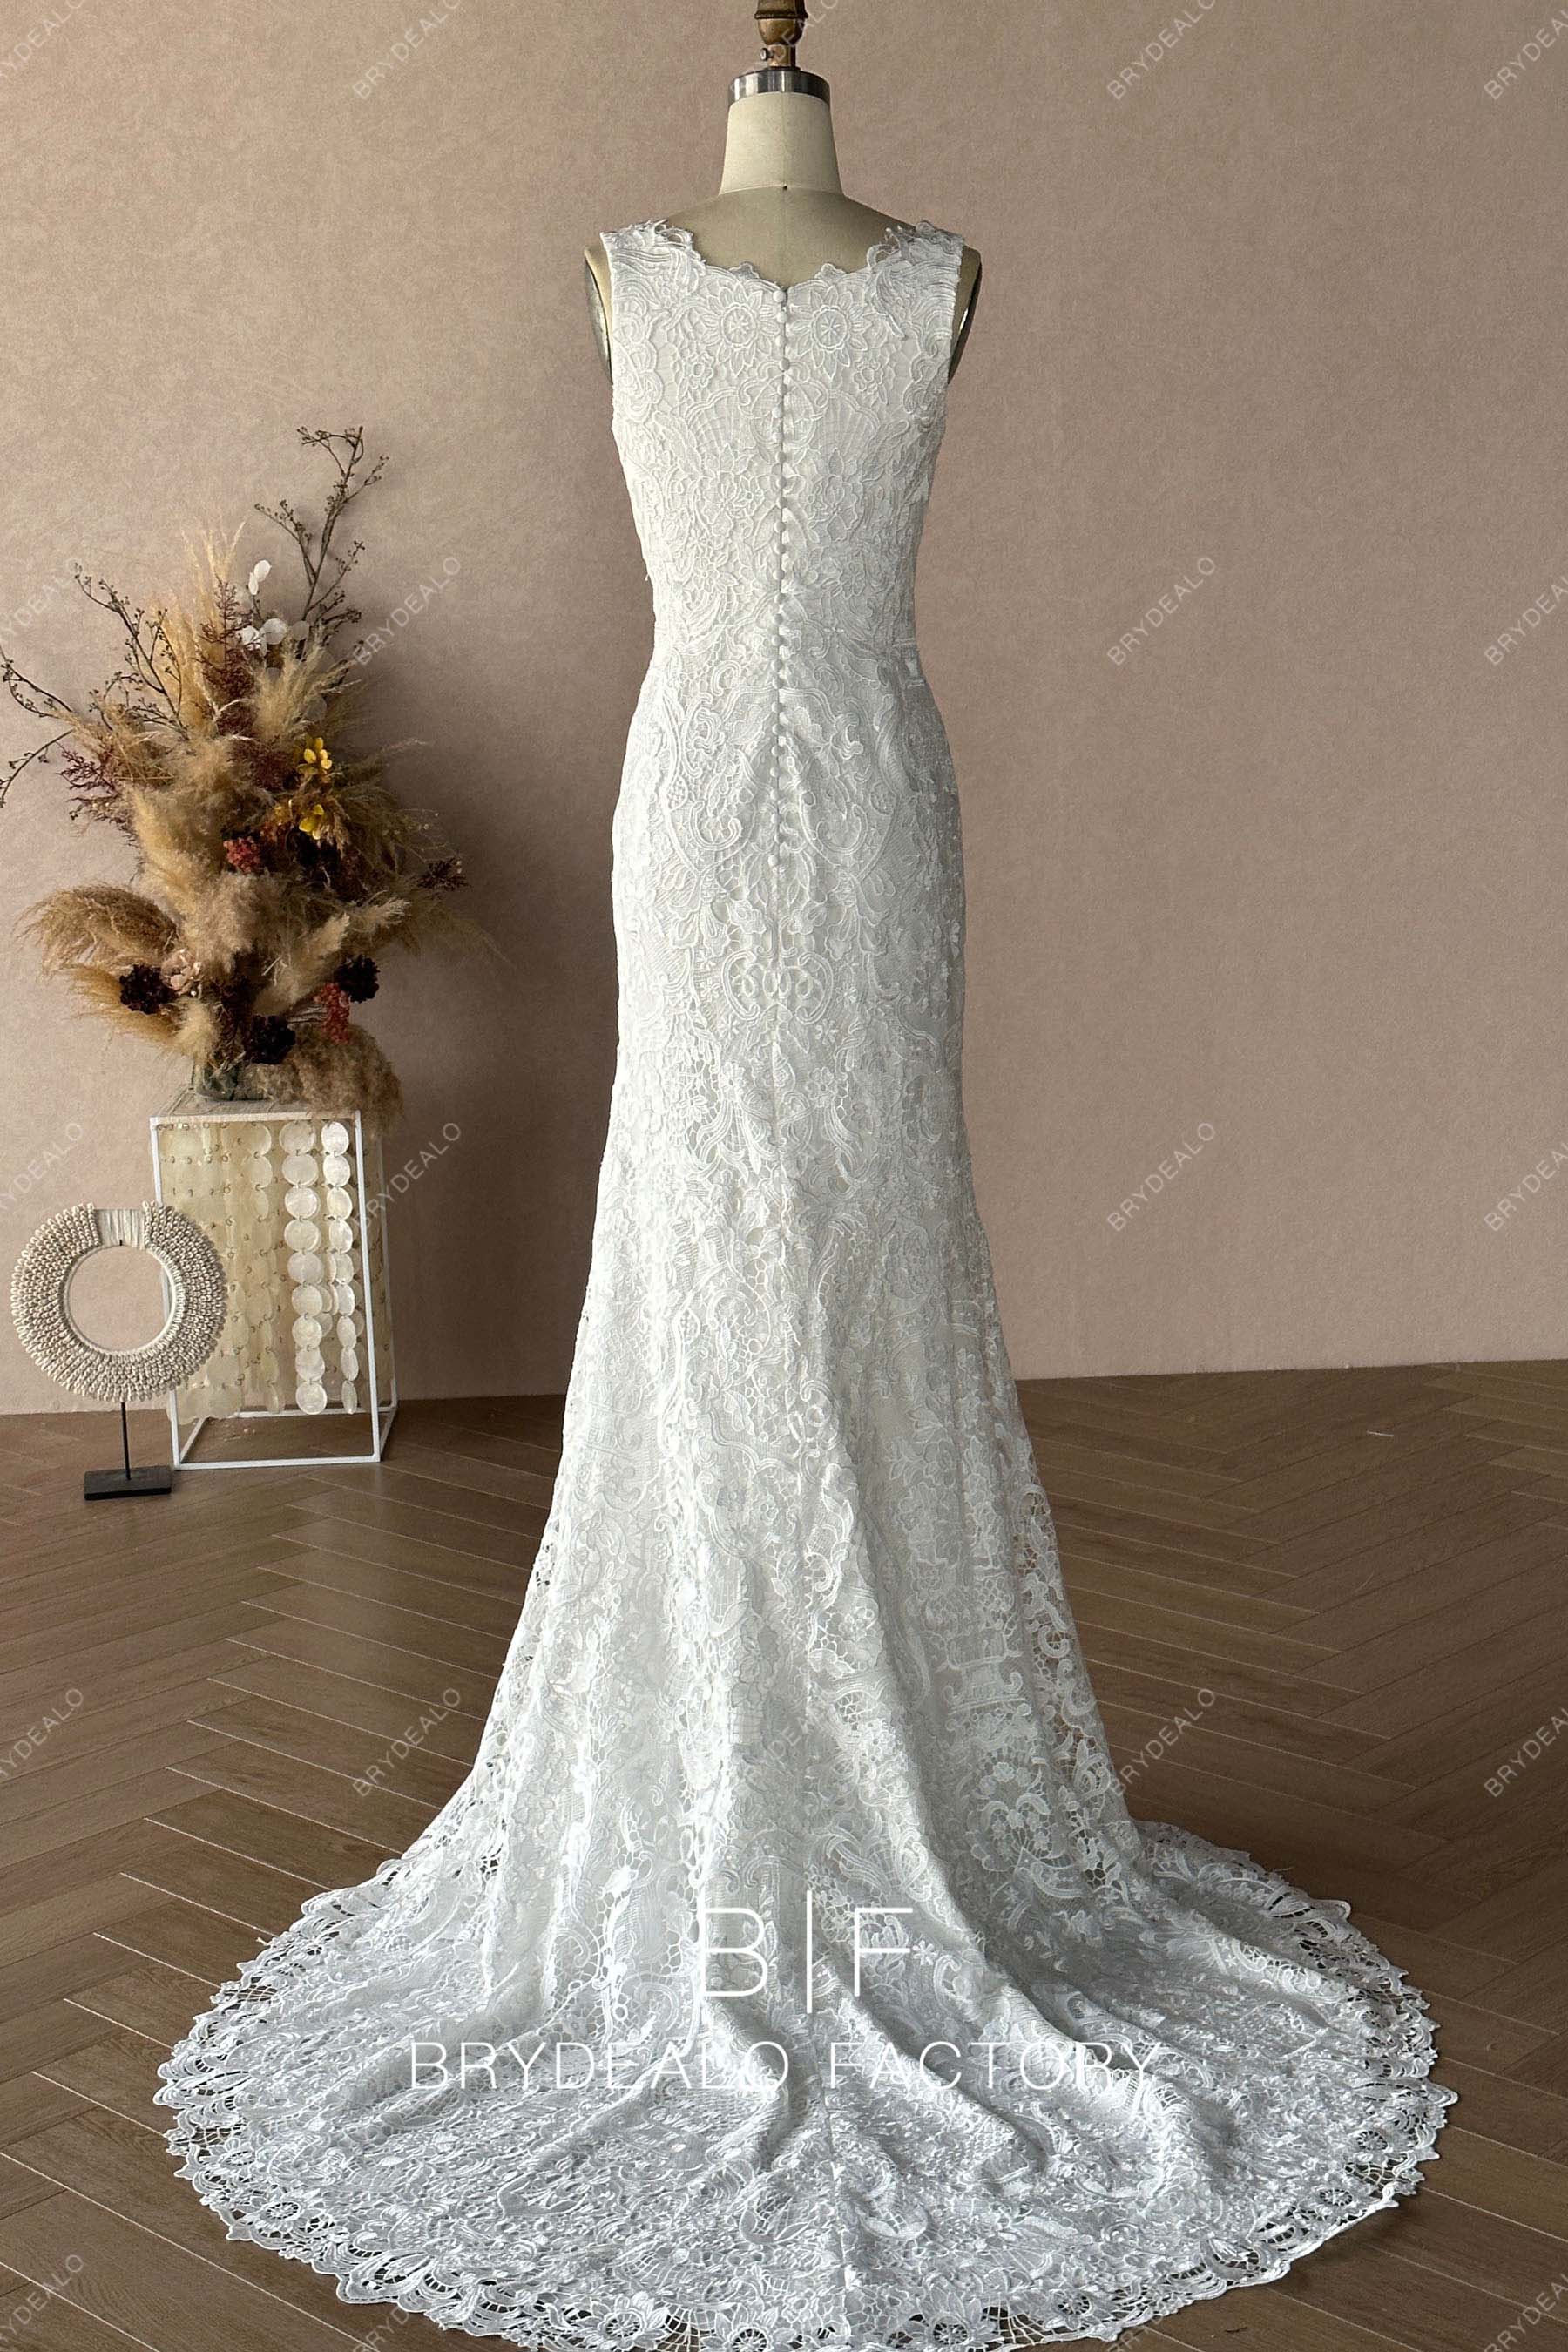 Private Label Sleeveless Lace Bridal Dress